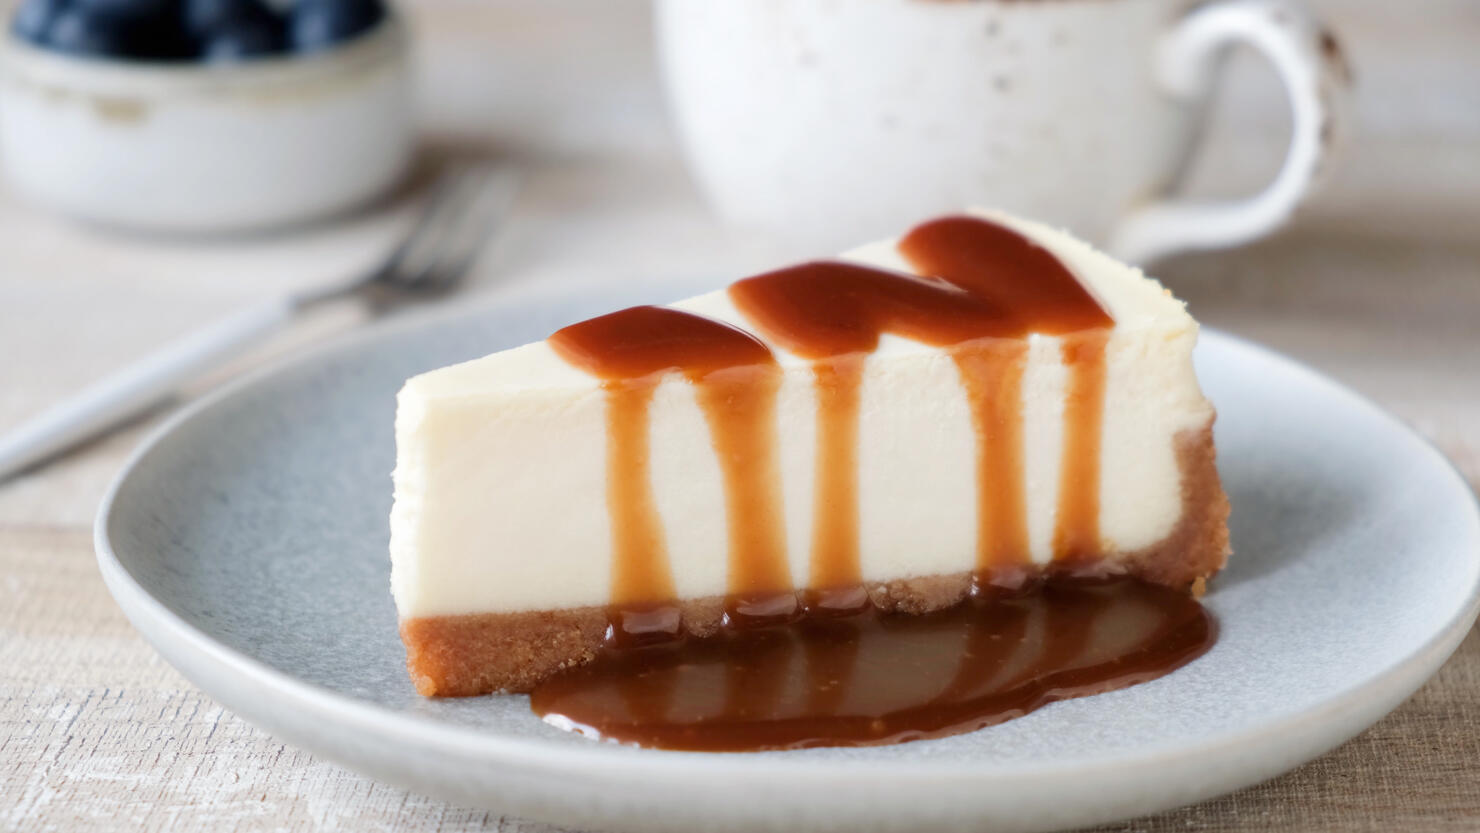 Slice of cheesecake with caramel sauce